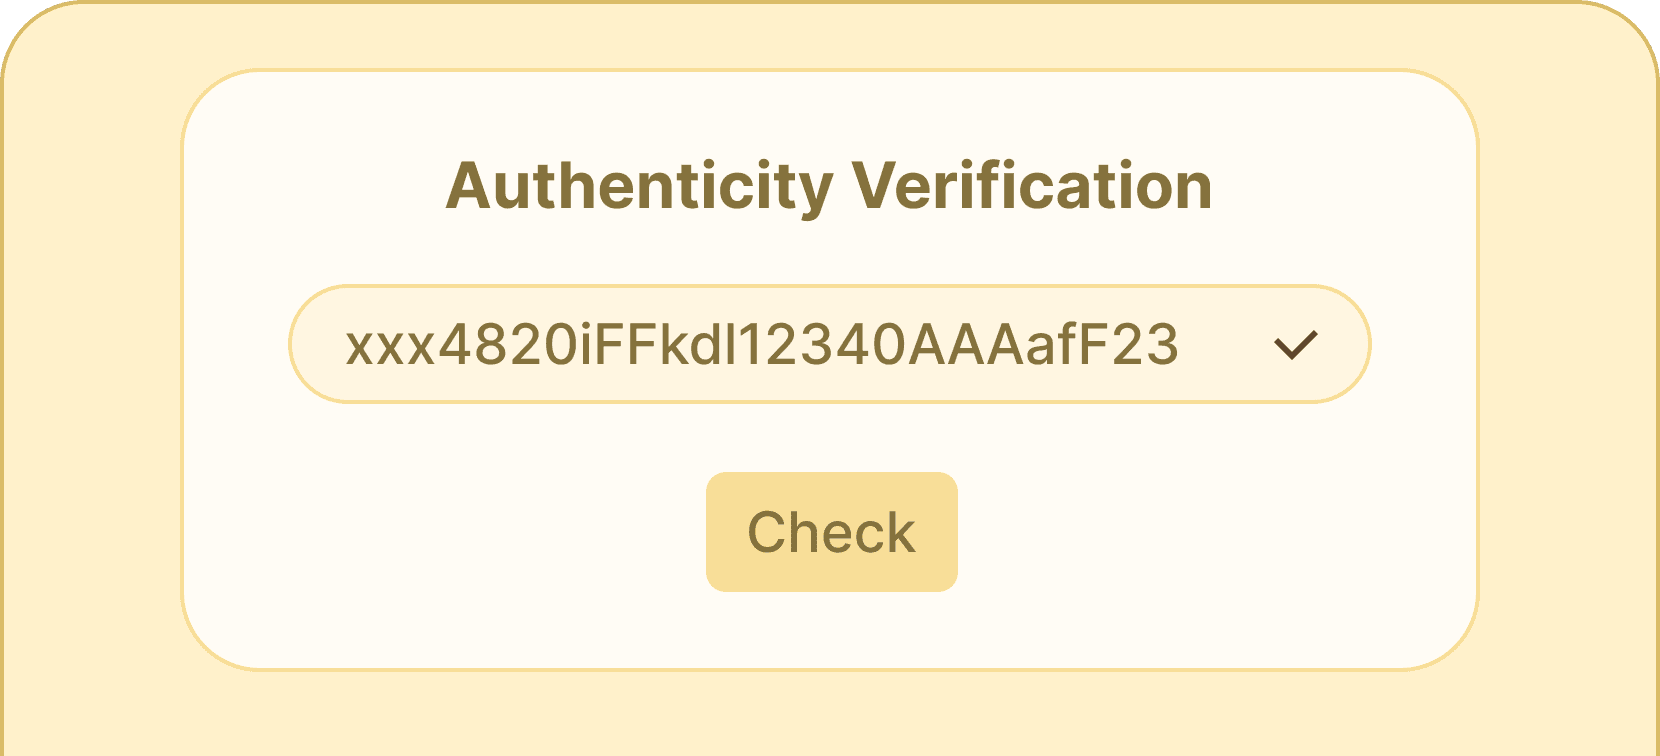 certifier-features-uuid-based-verification